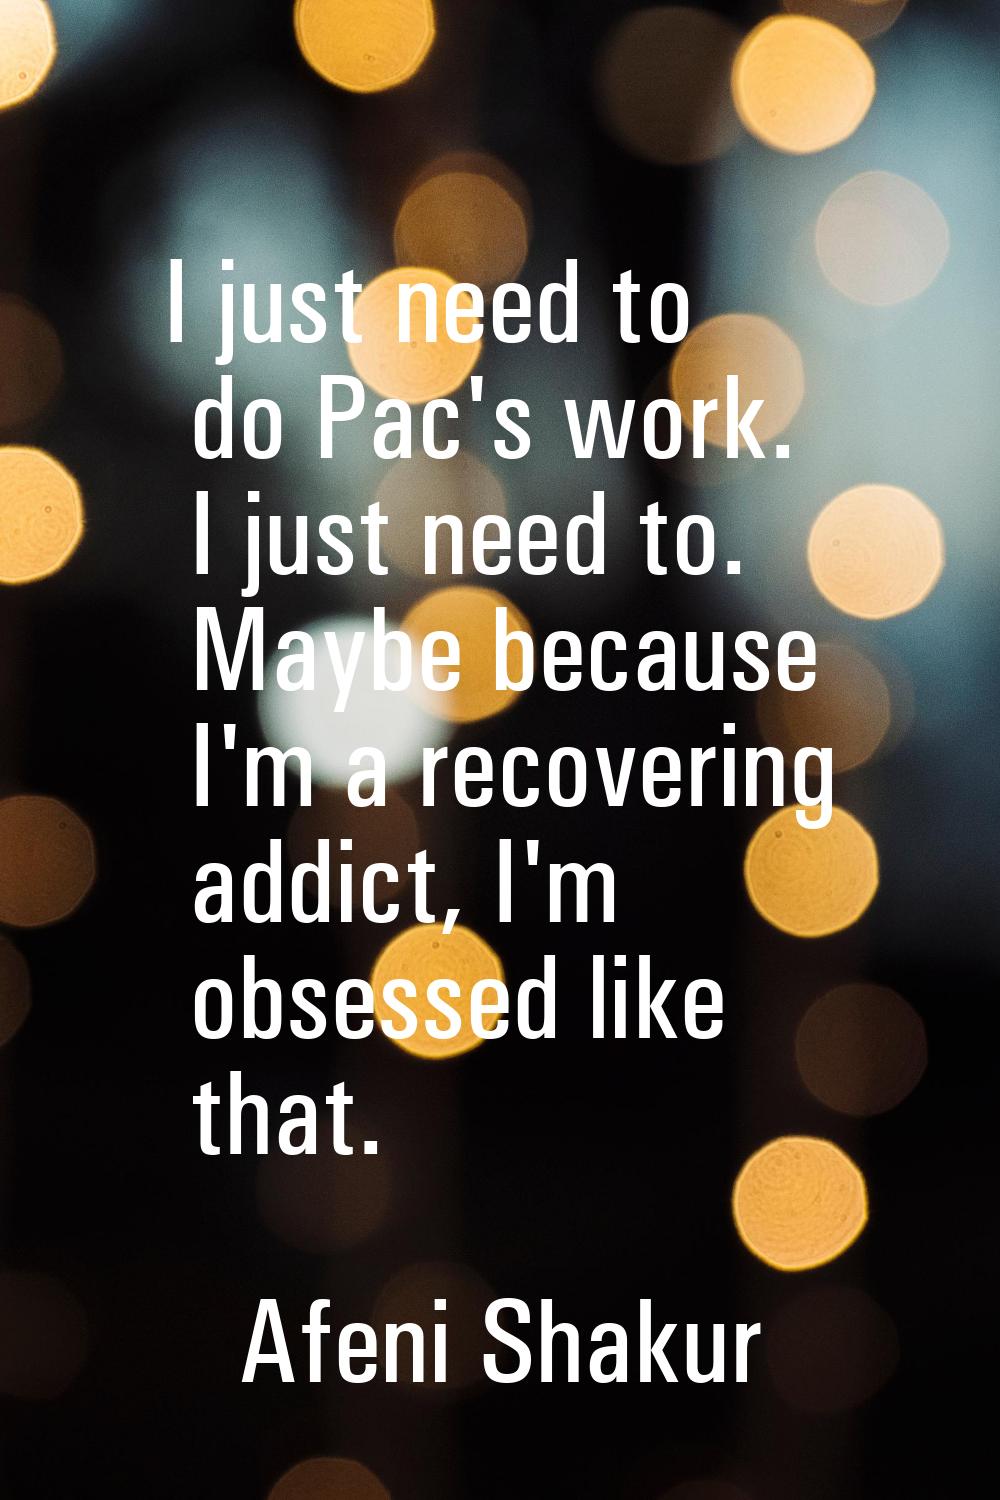 I just need to do Pac's work. I just need to. Maybe because I'm a recovering addict, I'm obsessed l